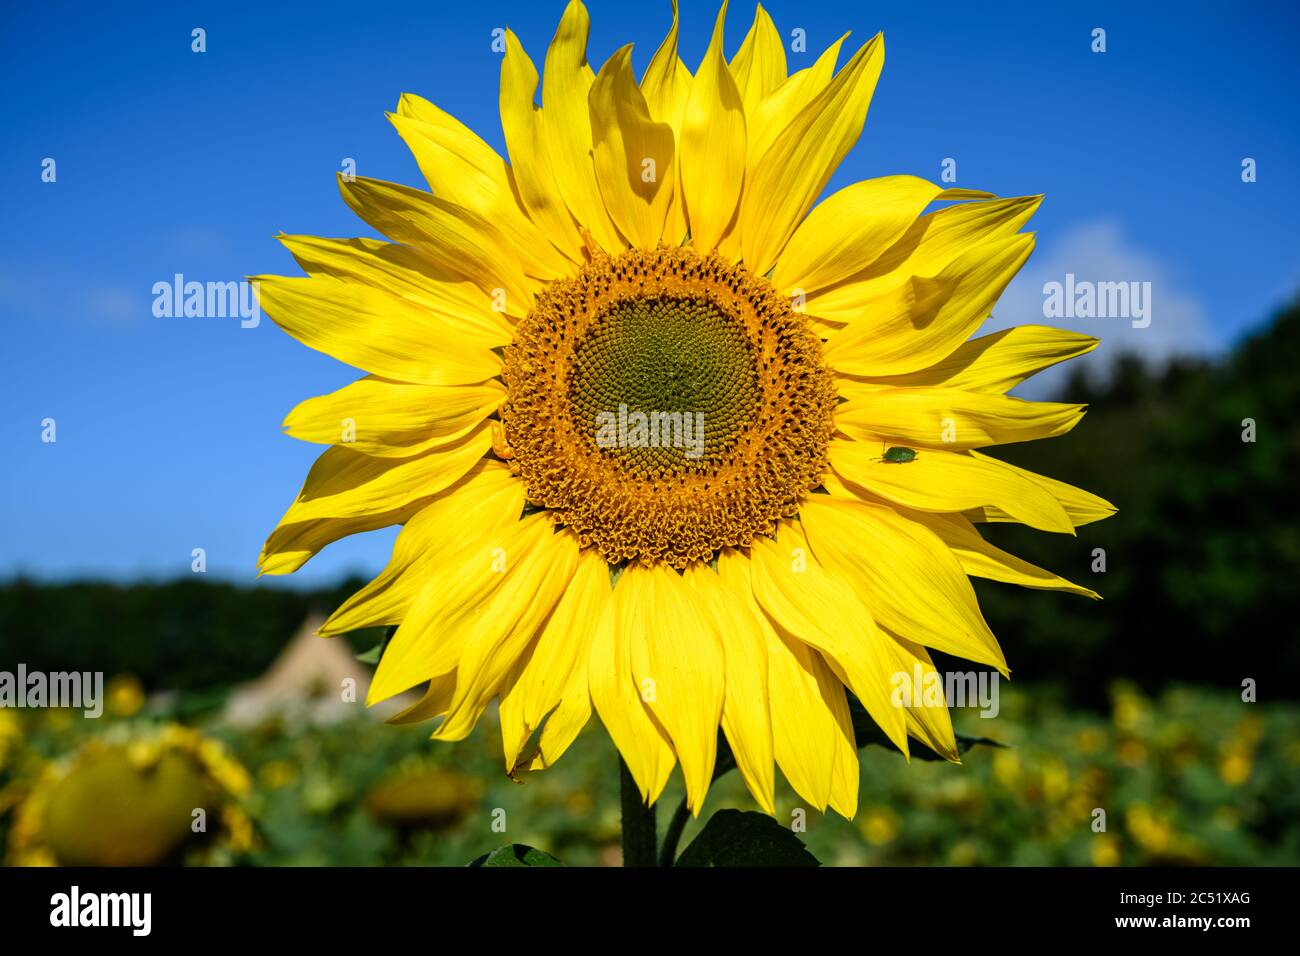 Sunflower against a bright blue sky with shield beetle Stock Photo